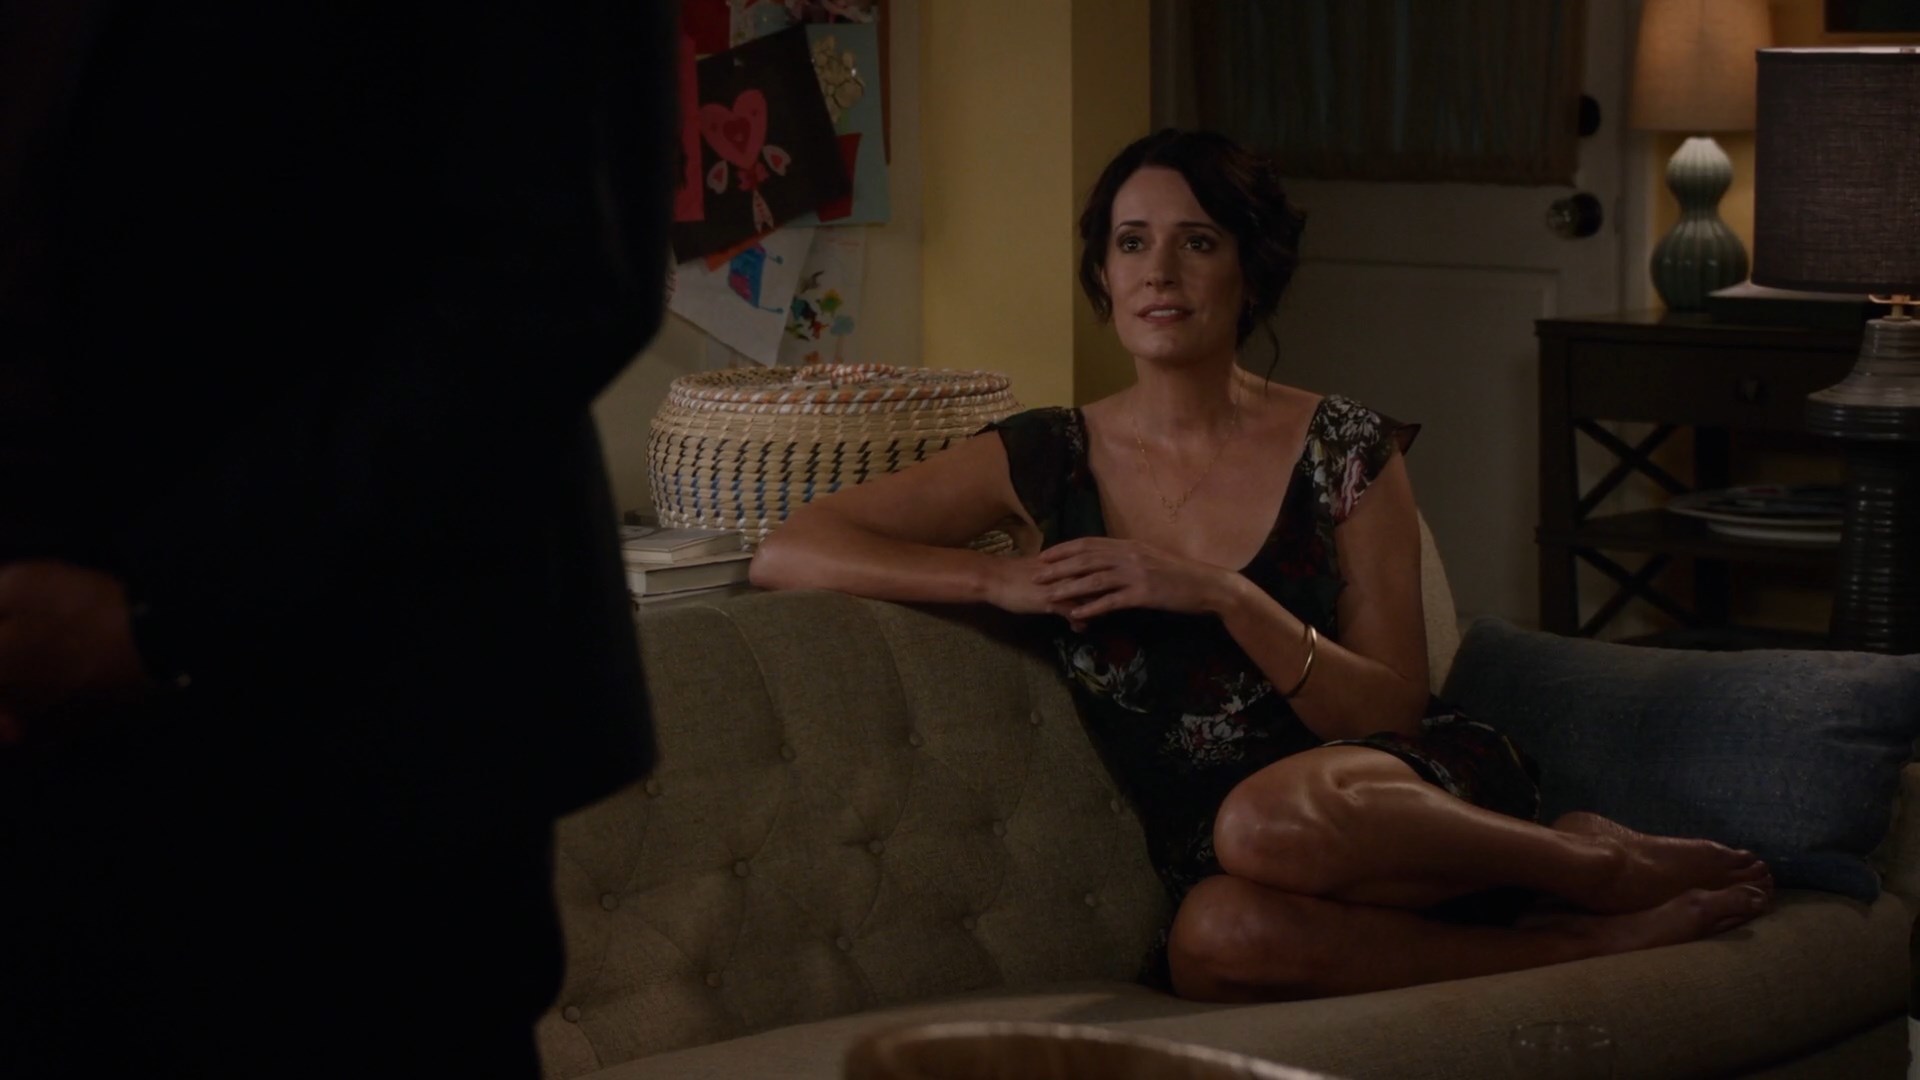 People who liked Paget Brewster's feet, also liked.